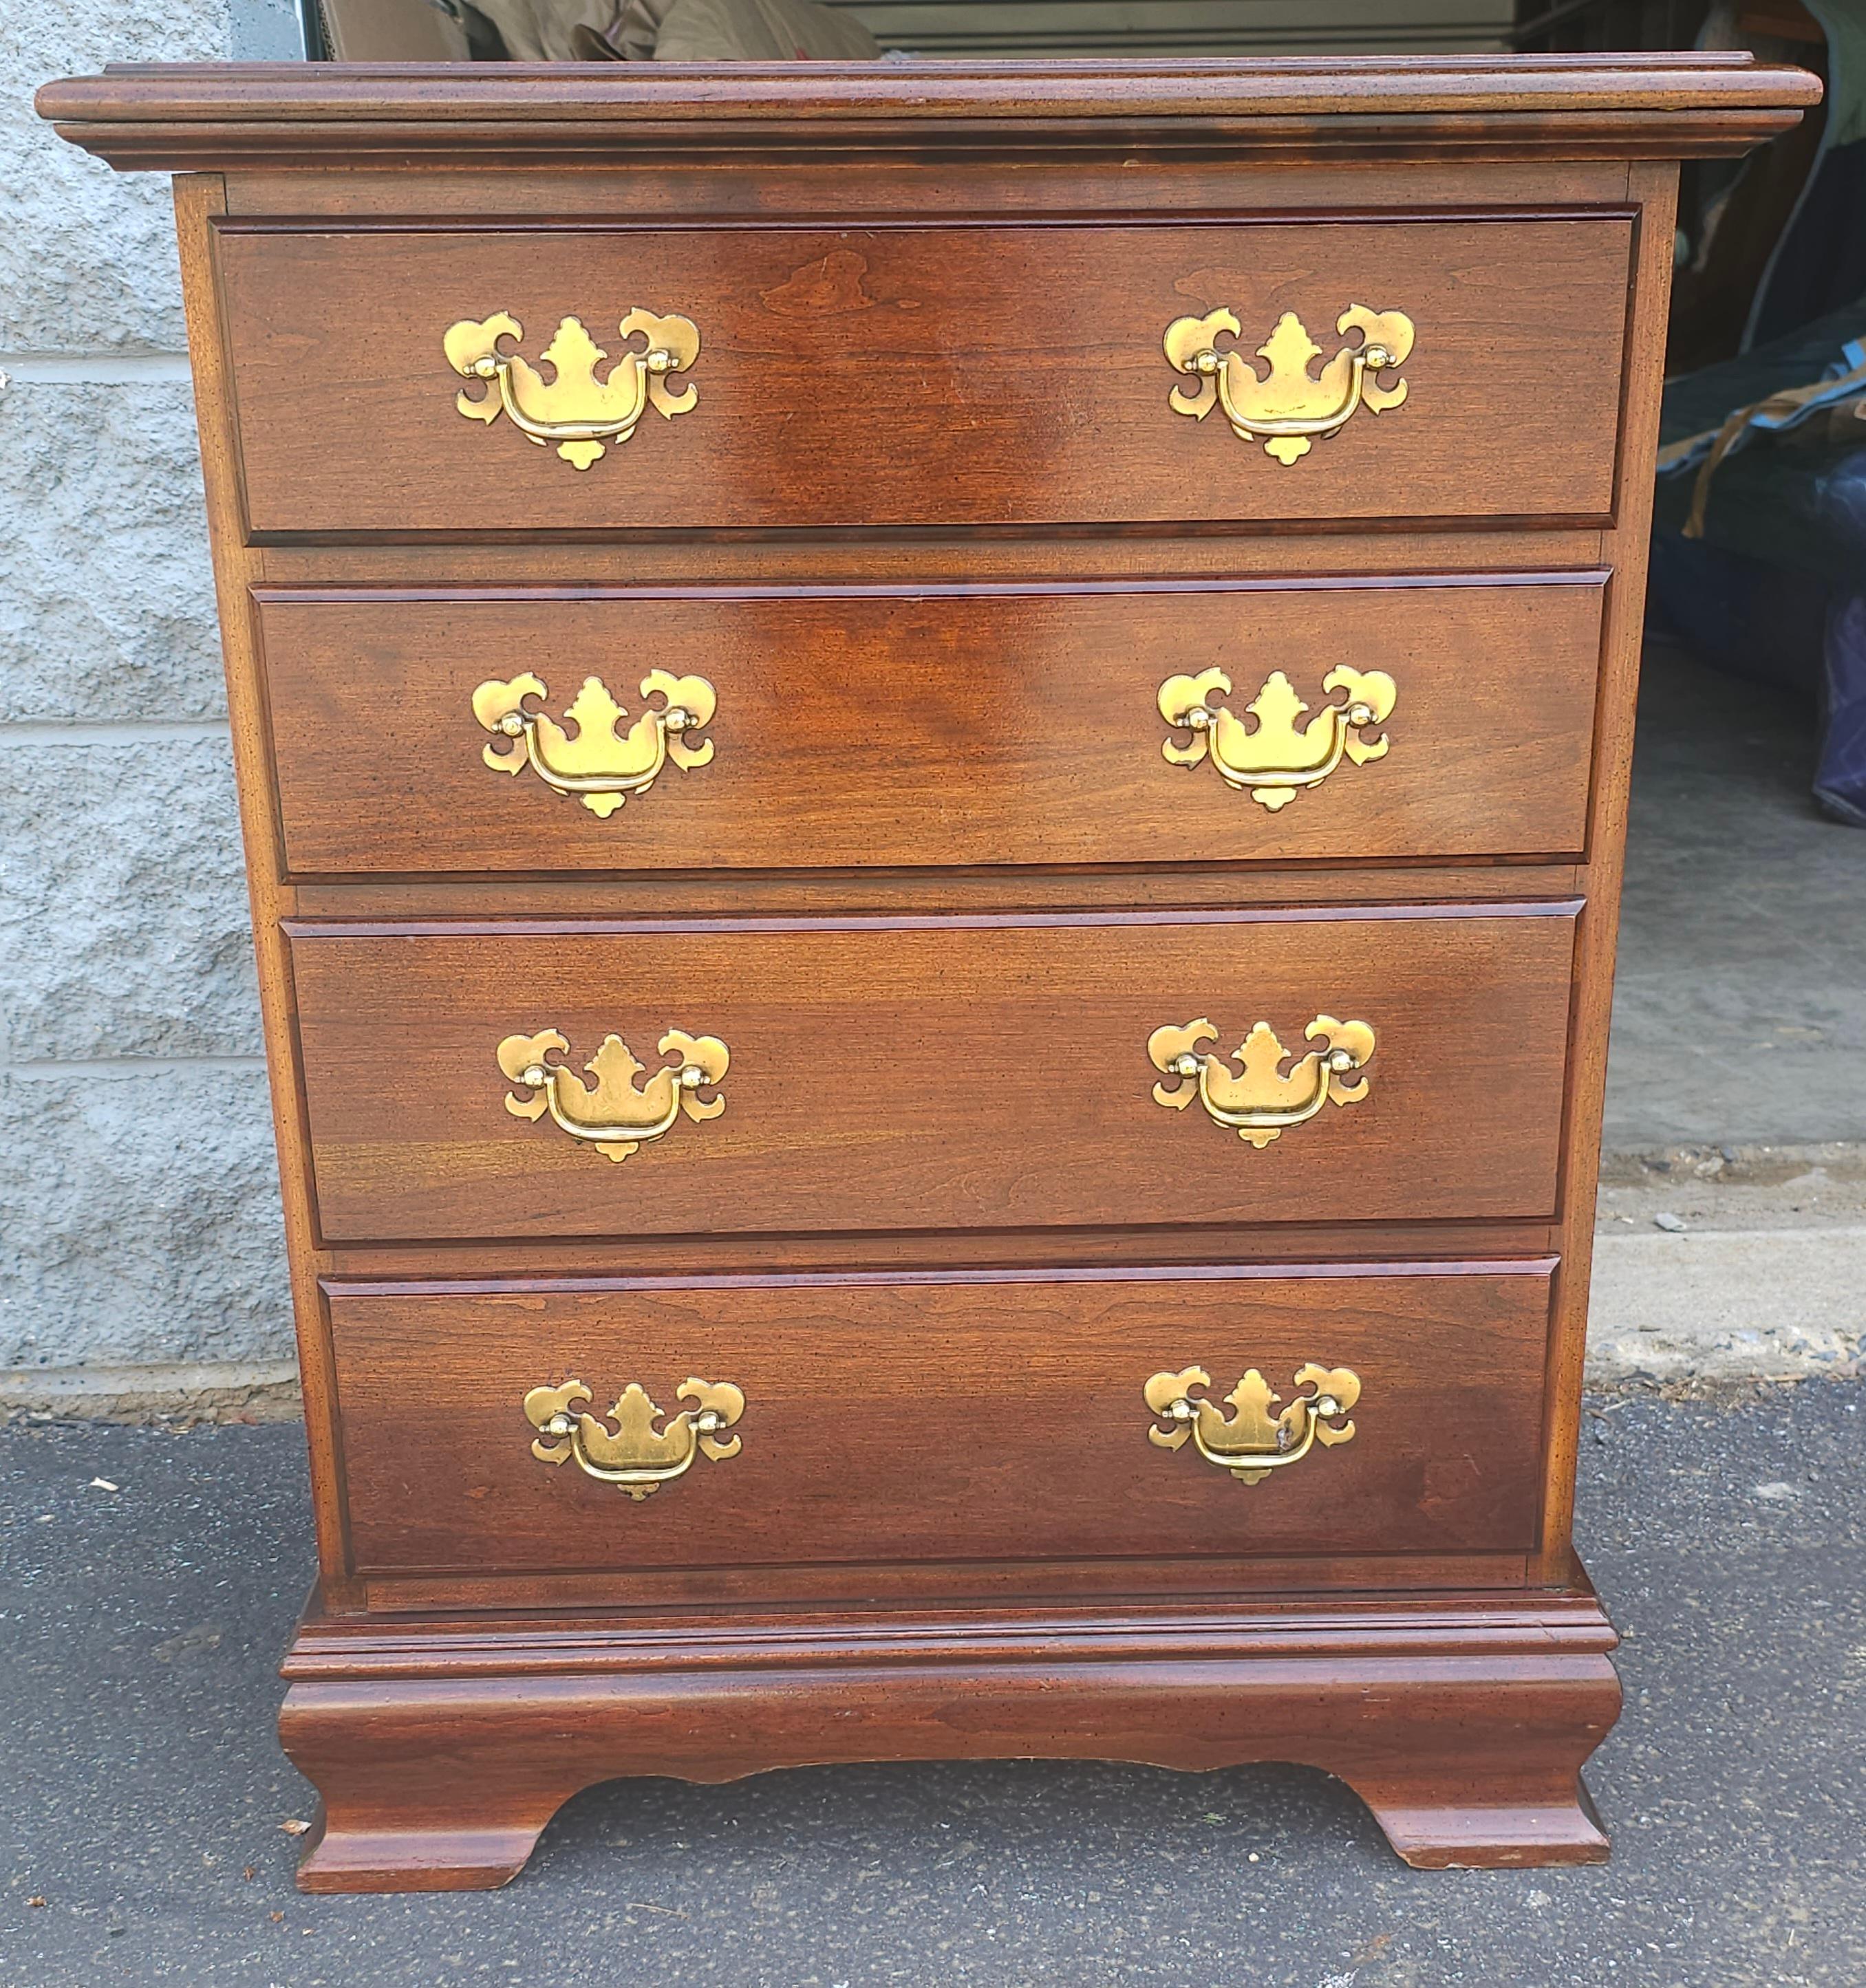 A 20th Century Chippendale Mahogany Four-Drawer Small Chest of Drawers with side handles. Measures 25